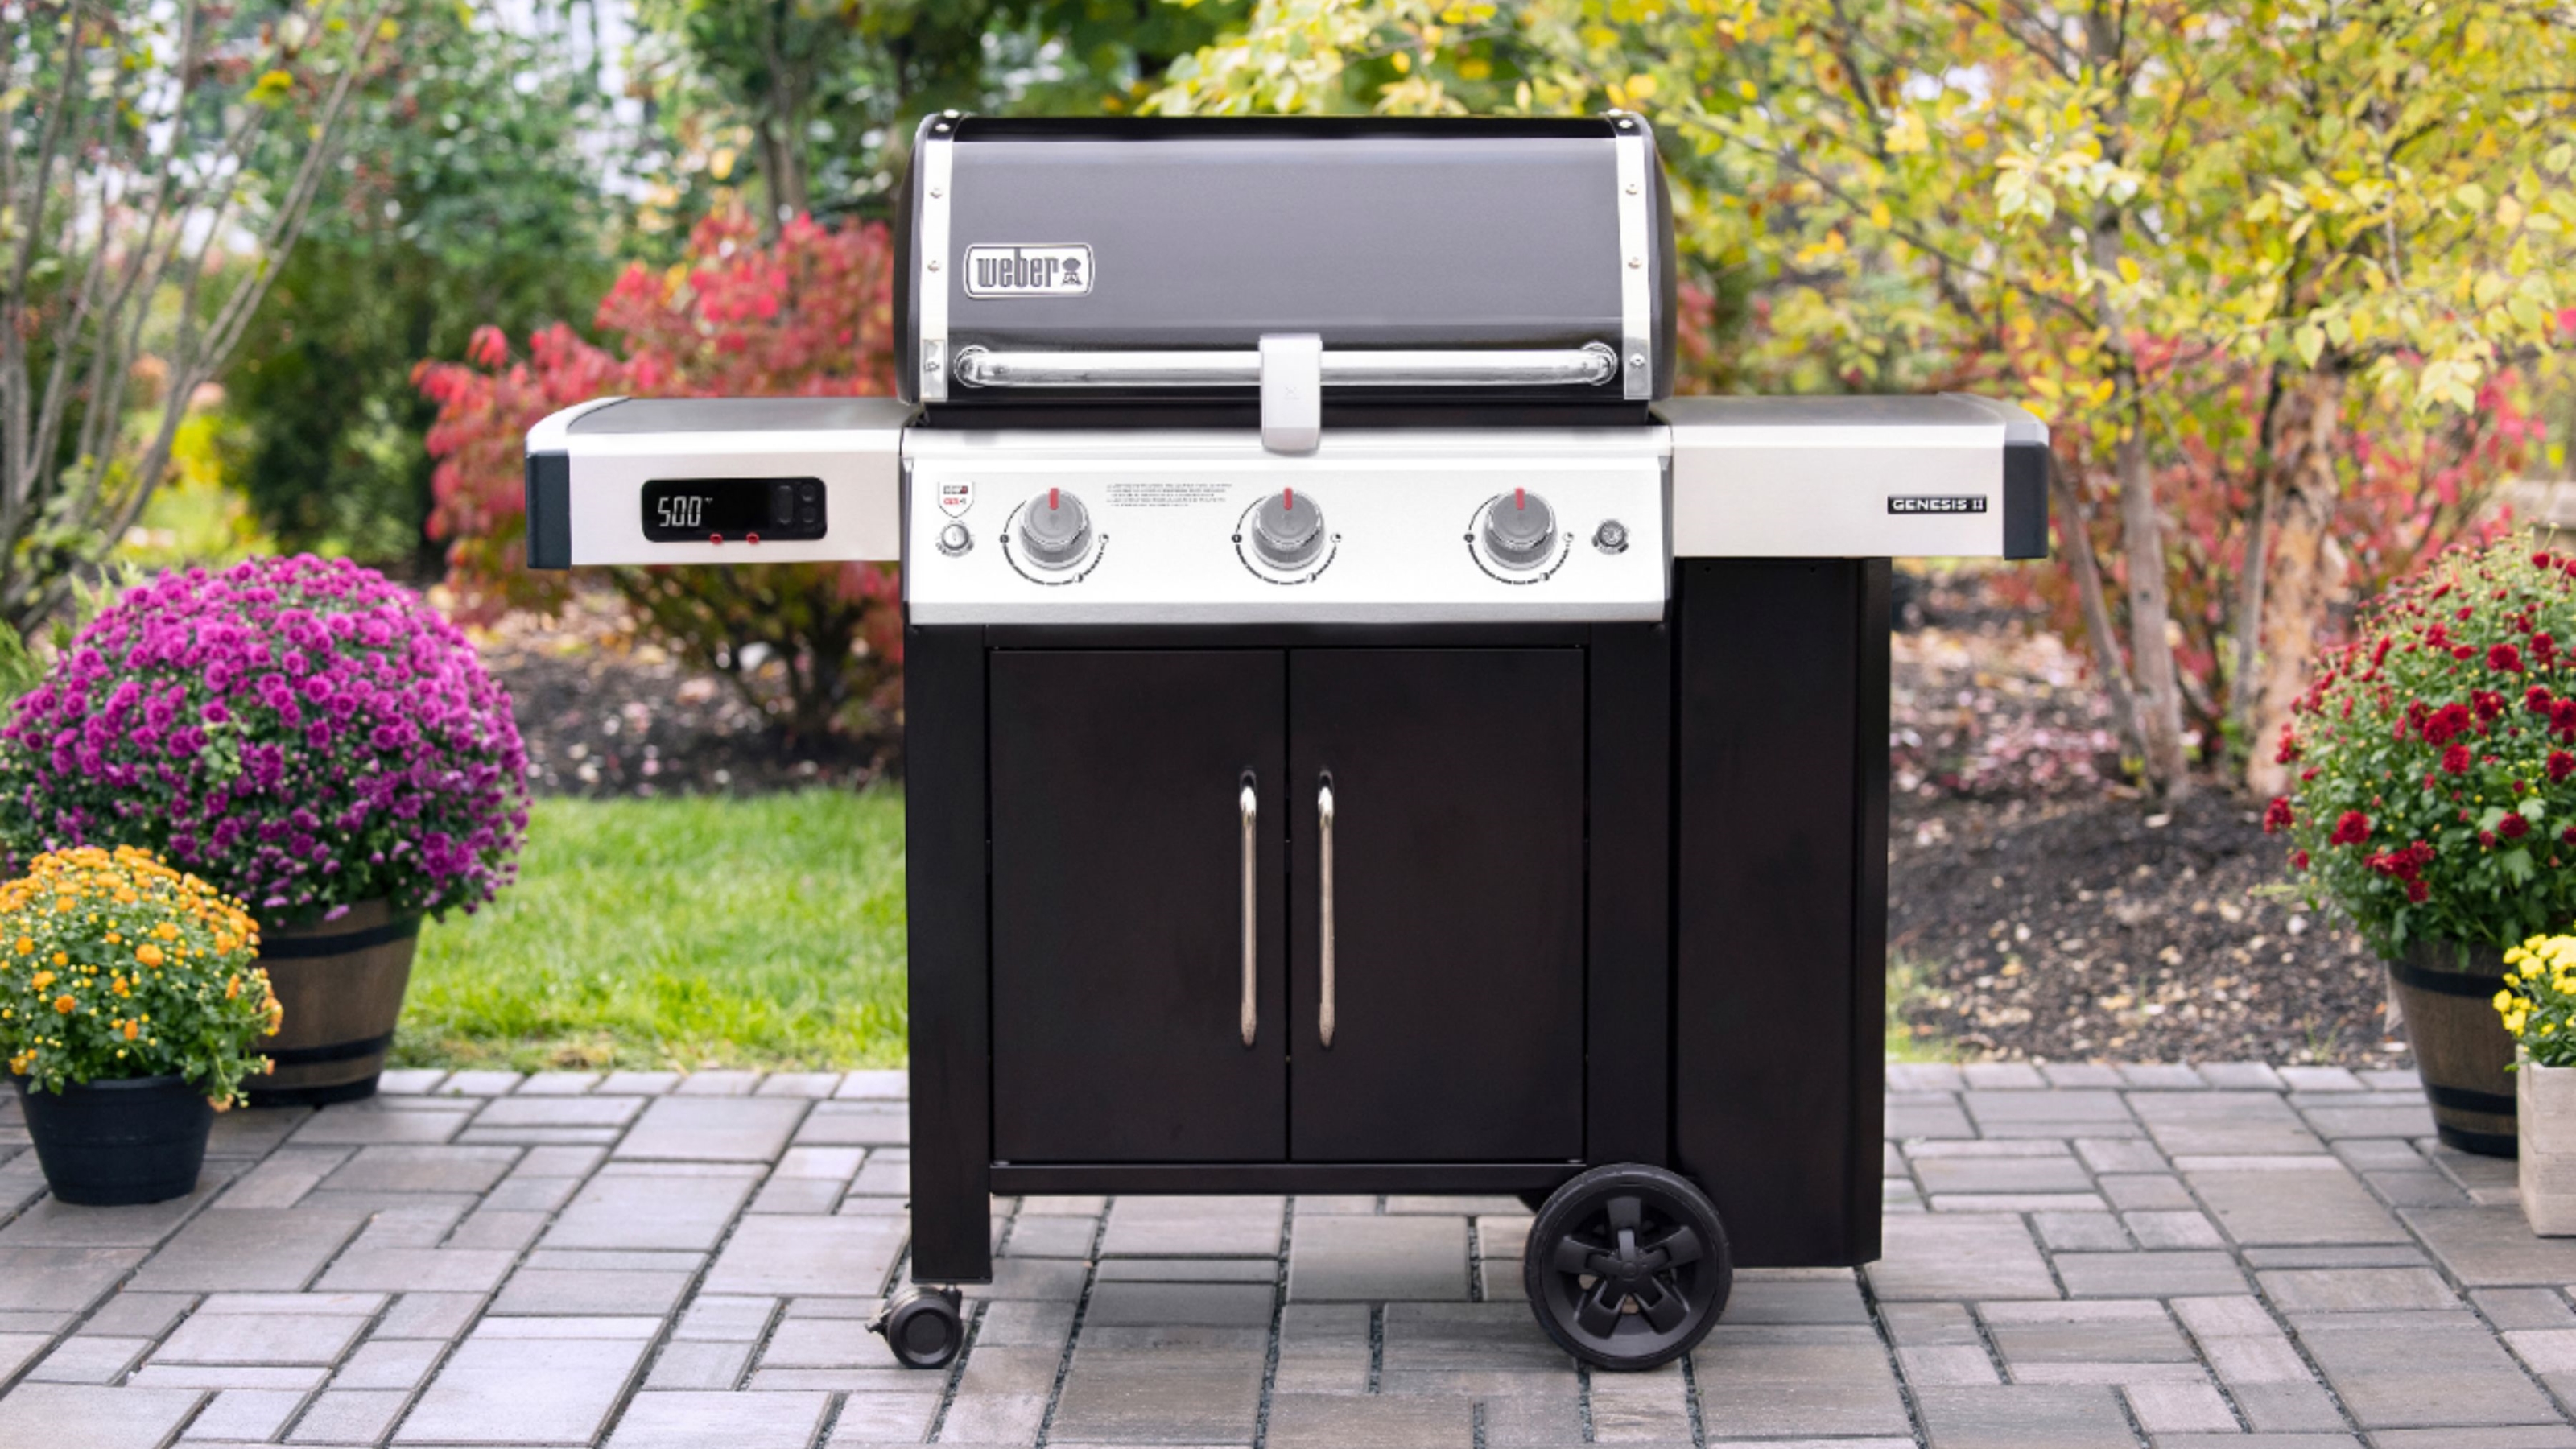 The 3 Best Gas Grills of 2024